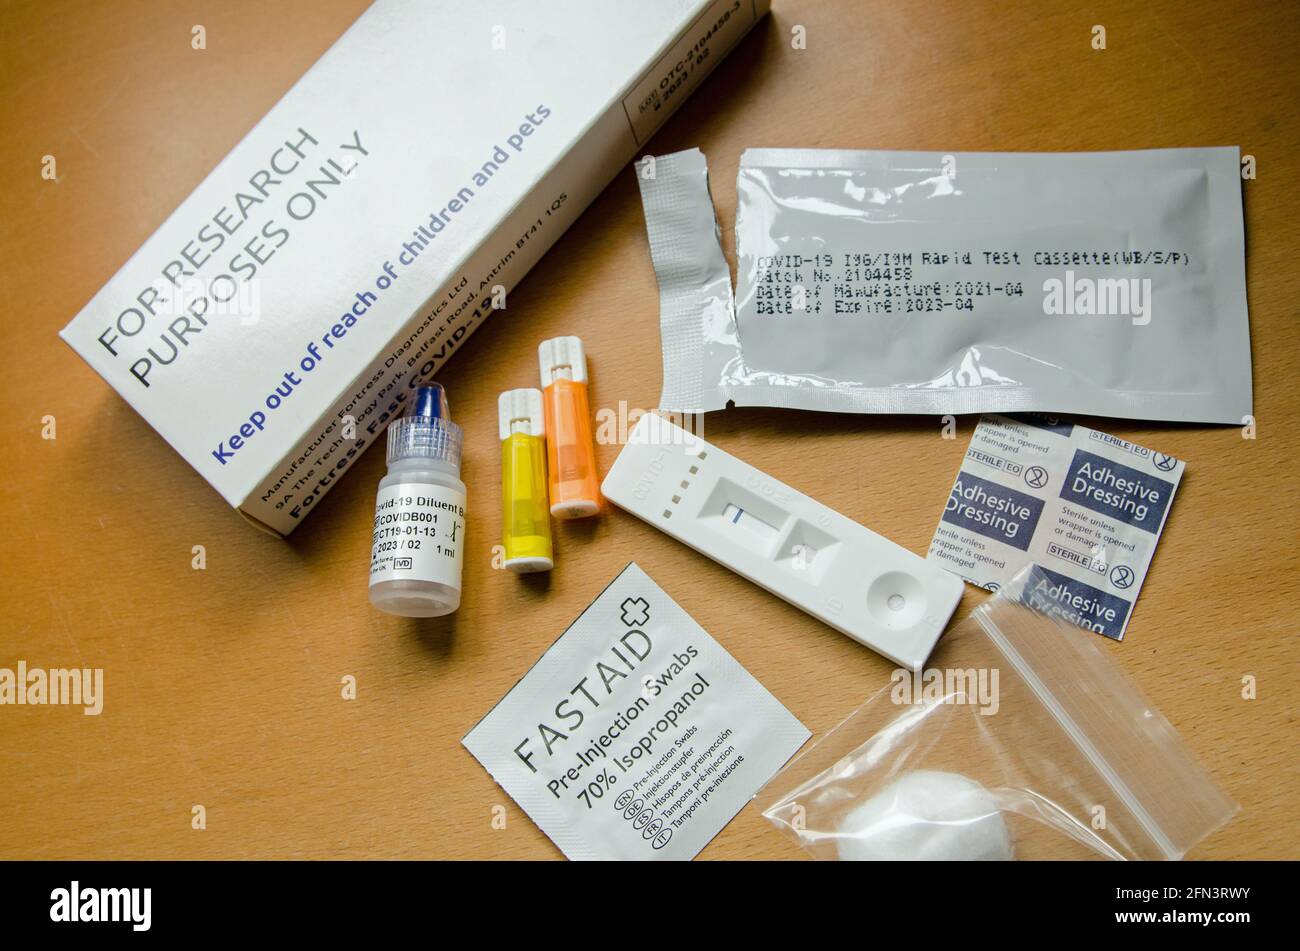 Basingstoke, UK - May 13, 2021: equipment for a COVID-19 antibody test as sent out by the NHS in England to work out how much of the population has a Stock Photo